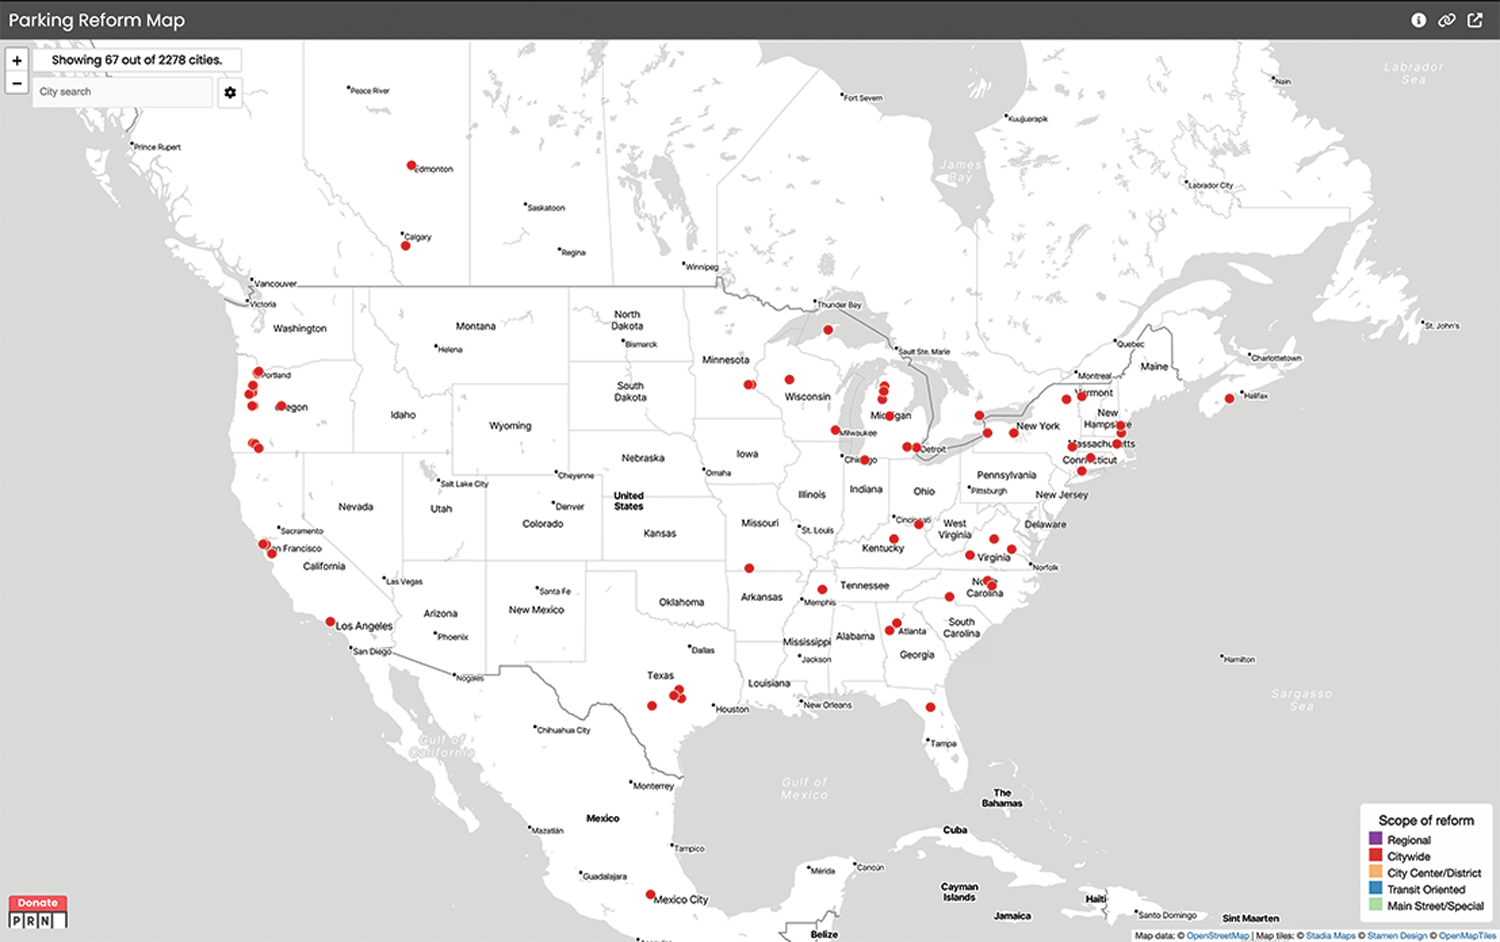 map of North American shows dozens of red dots to represent cities where parking reforms have been instituted